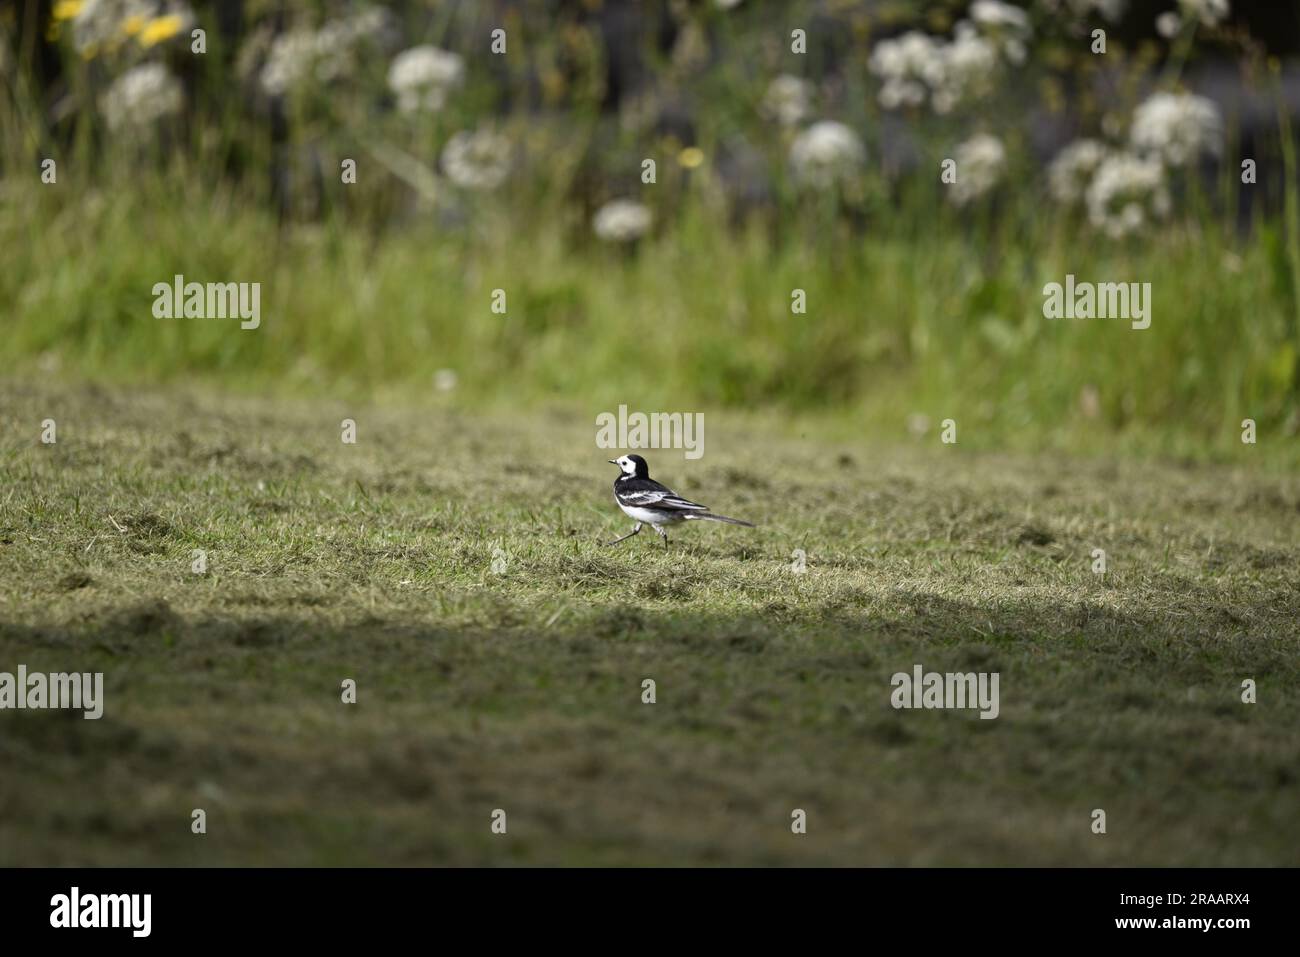 Pied Wagtail/White Wagtail (Motacilla alba) Walking Right to Left with Left Foot Forward, Along Grassy Edge of River Bank with Wildflower Backdrop, UK Stock Photo